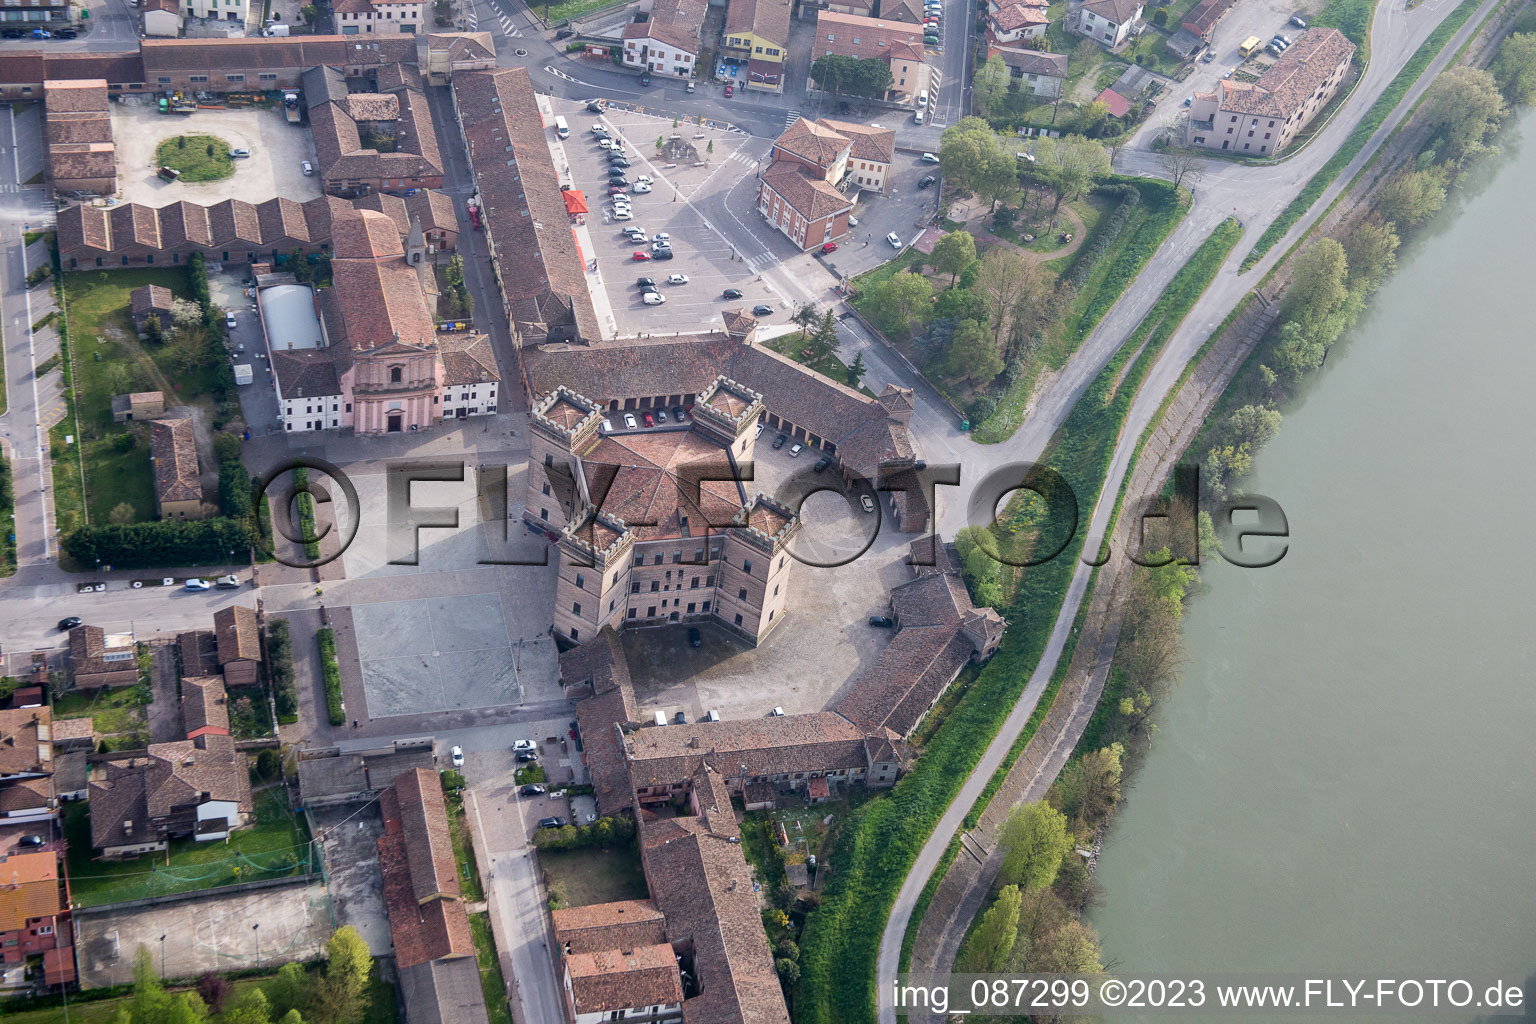 Mesola in the state Emilia Romagna, Italy seen from above